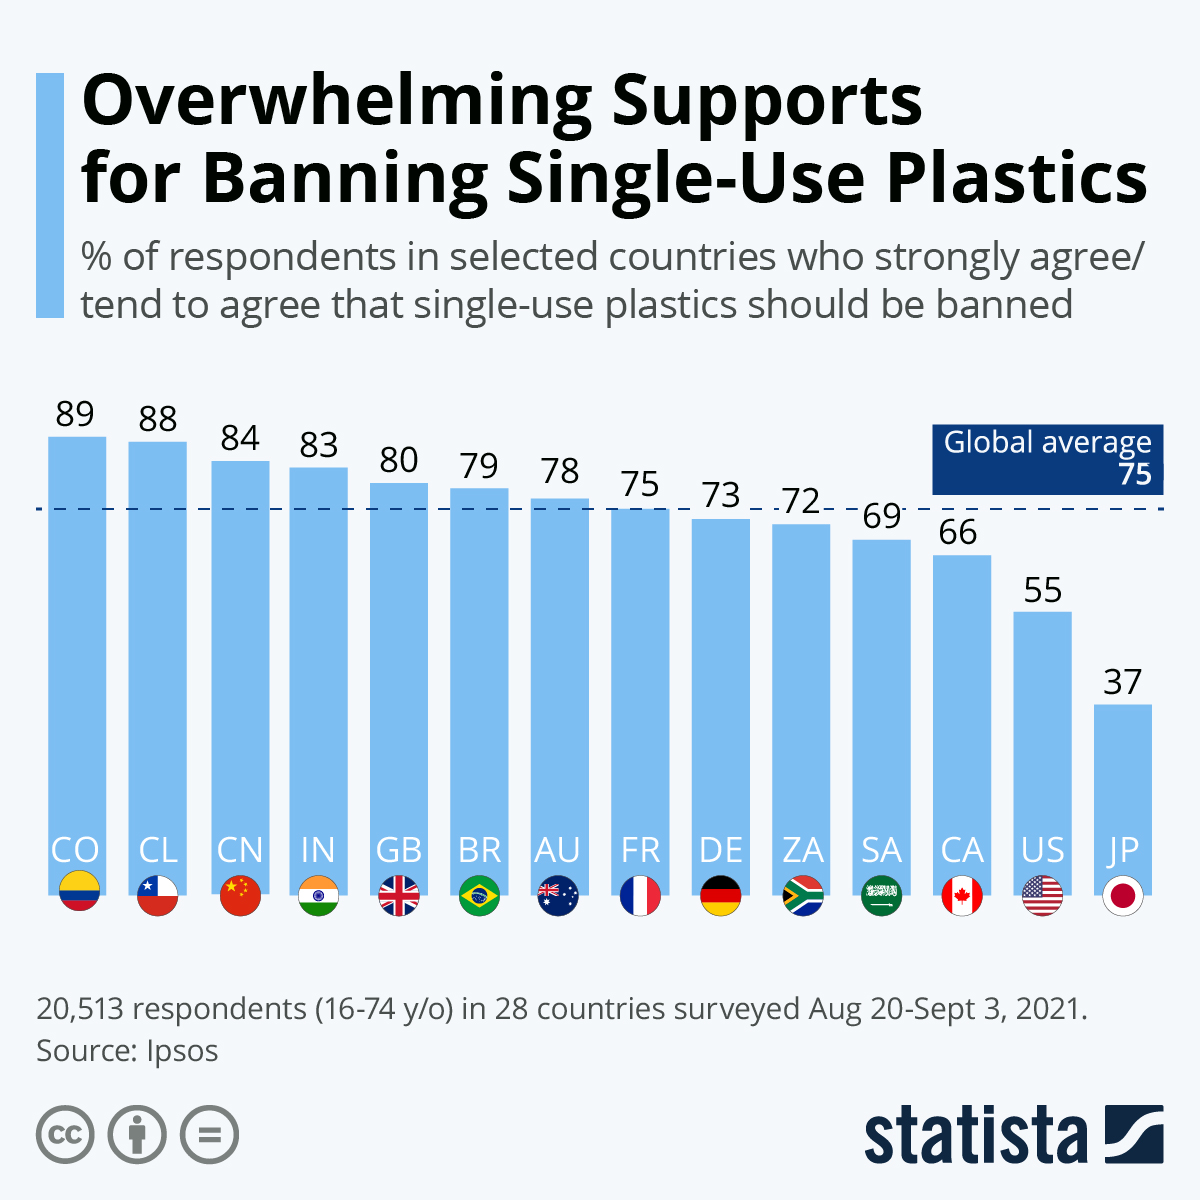 Overwhelming Supports for Banning Single-Use Plastics